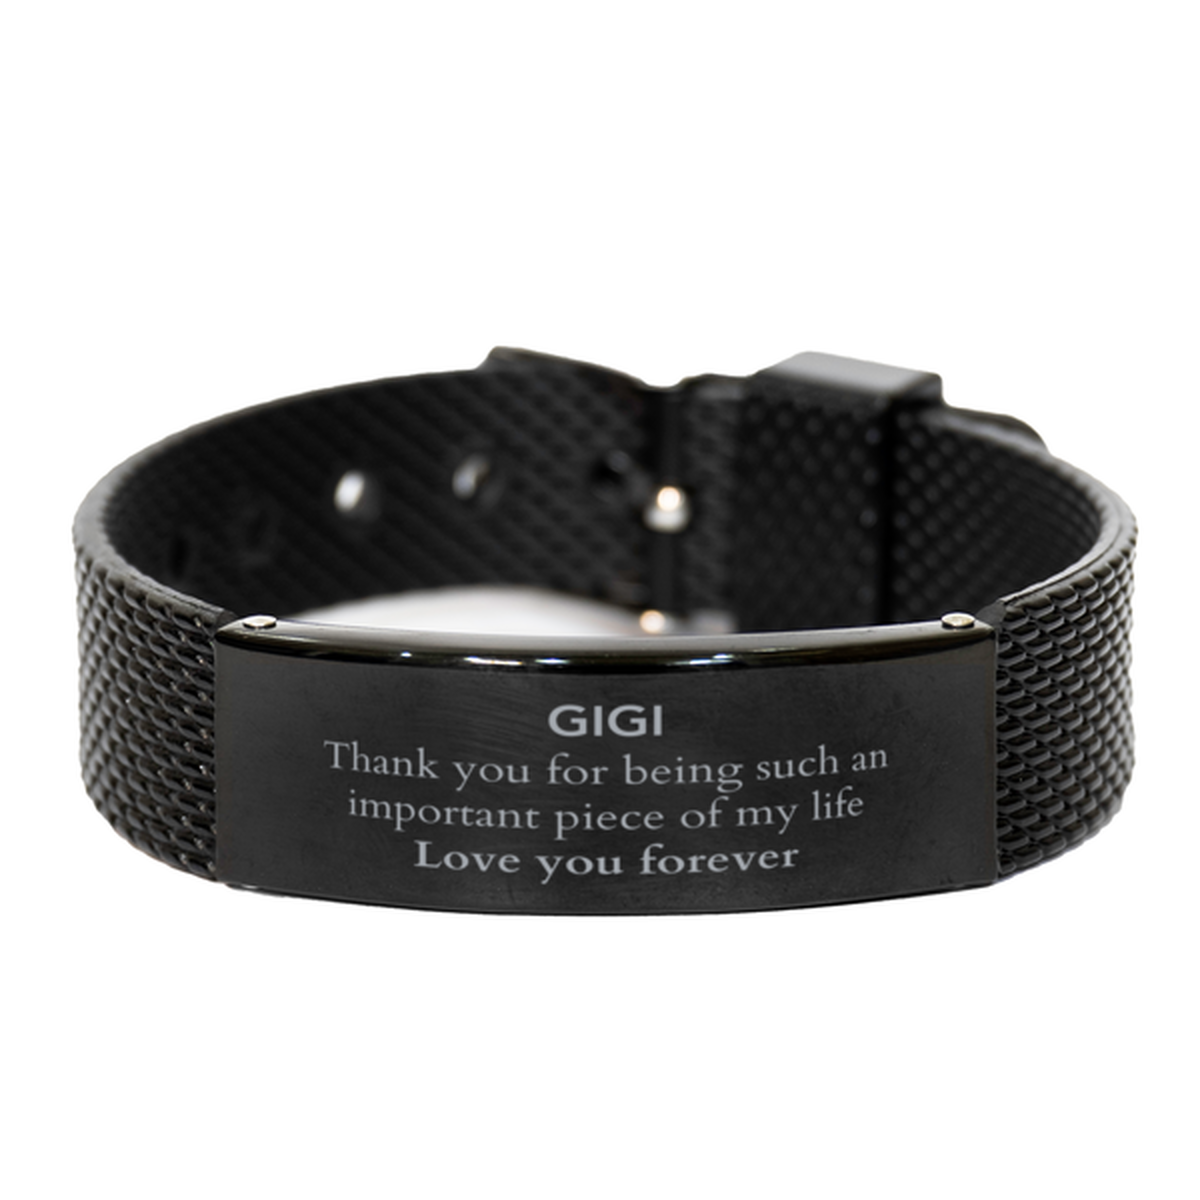 Appropriate Gigi Black Shark Mesh Bracelet Epic Birthday Gifts for Gigi Thank you for being such an important piece of my life Gigi Christmas Mothers Fathers Day